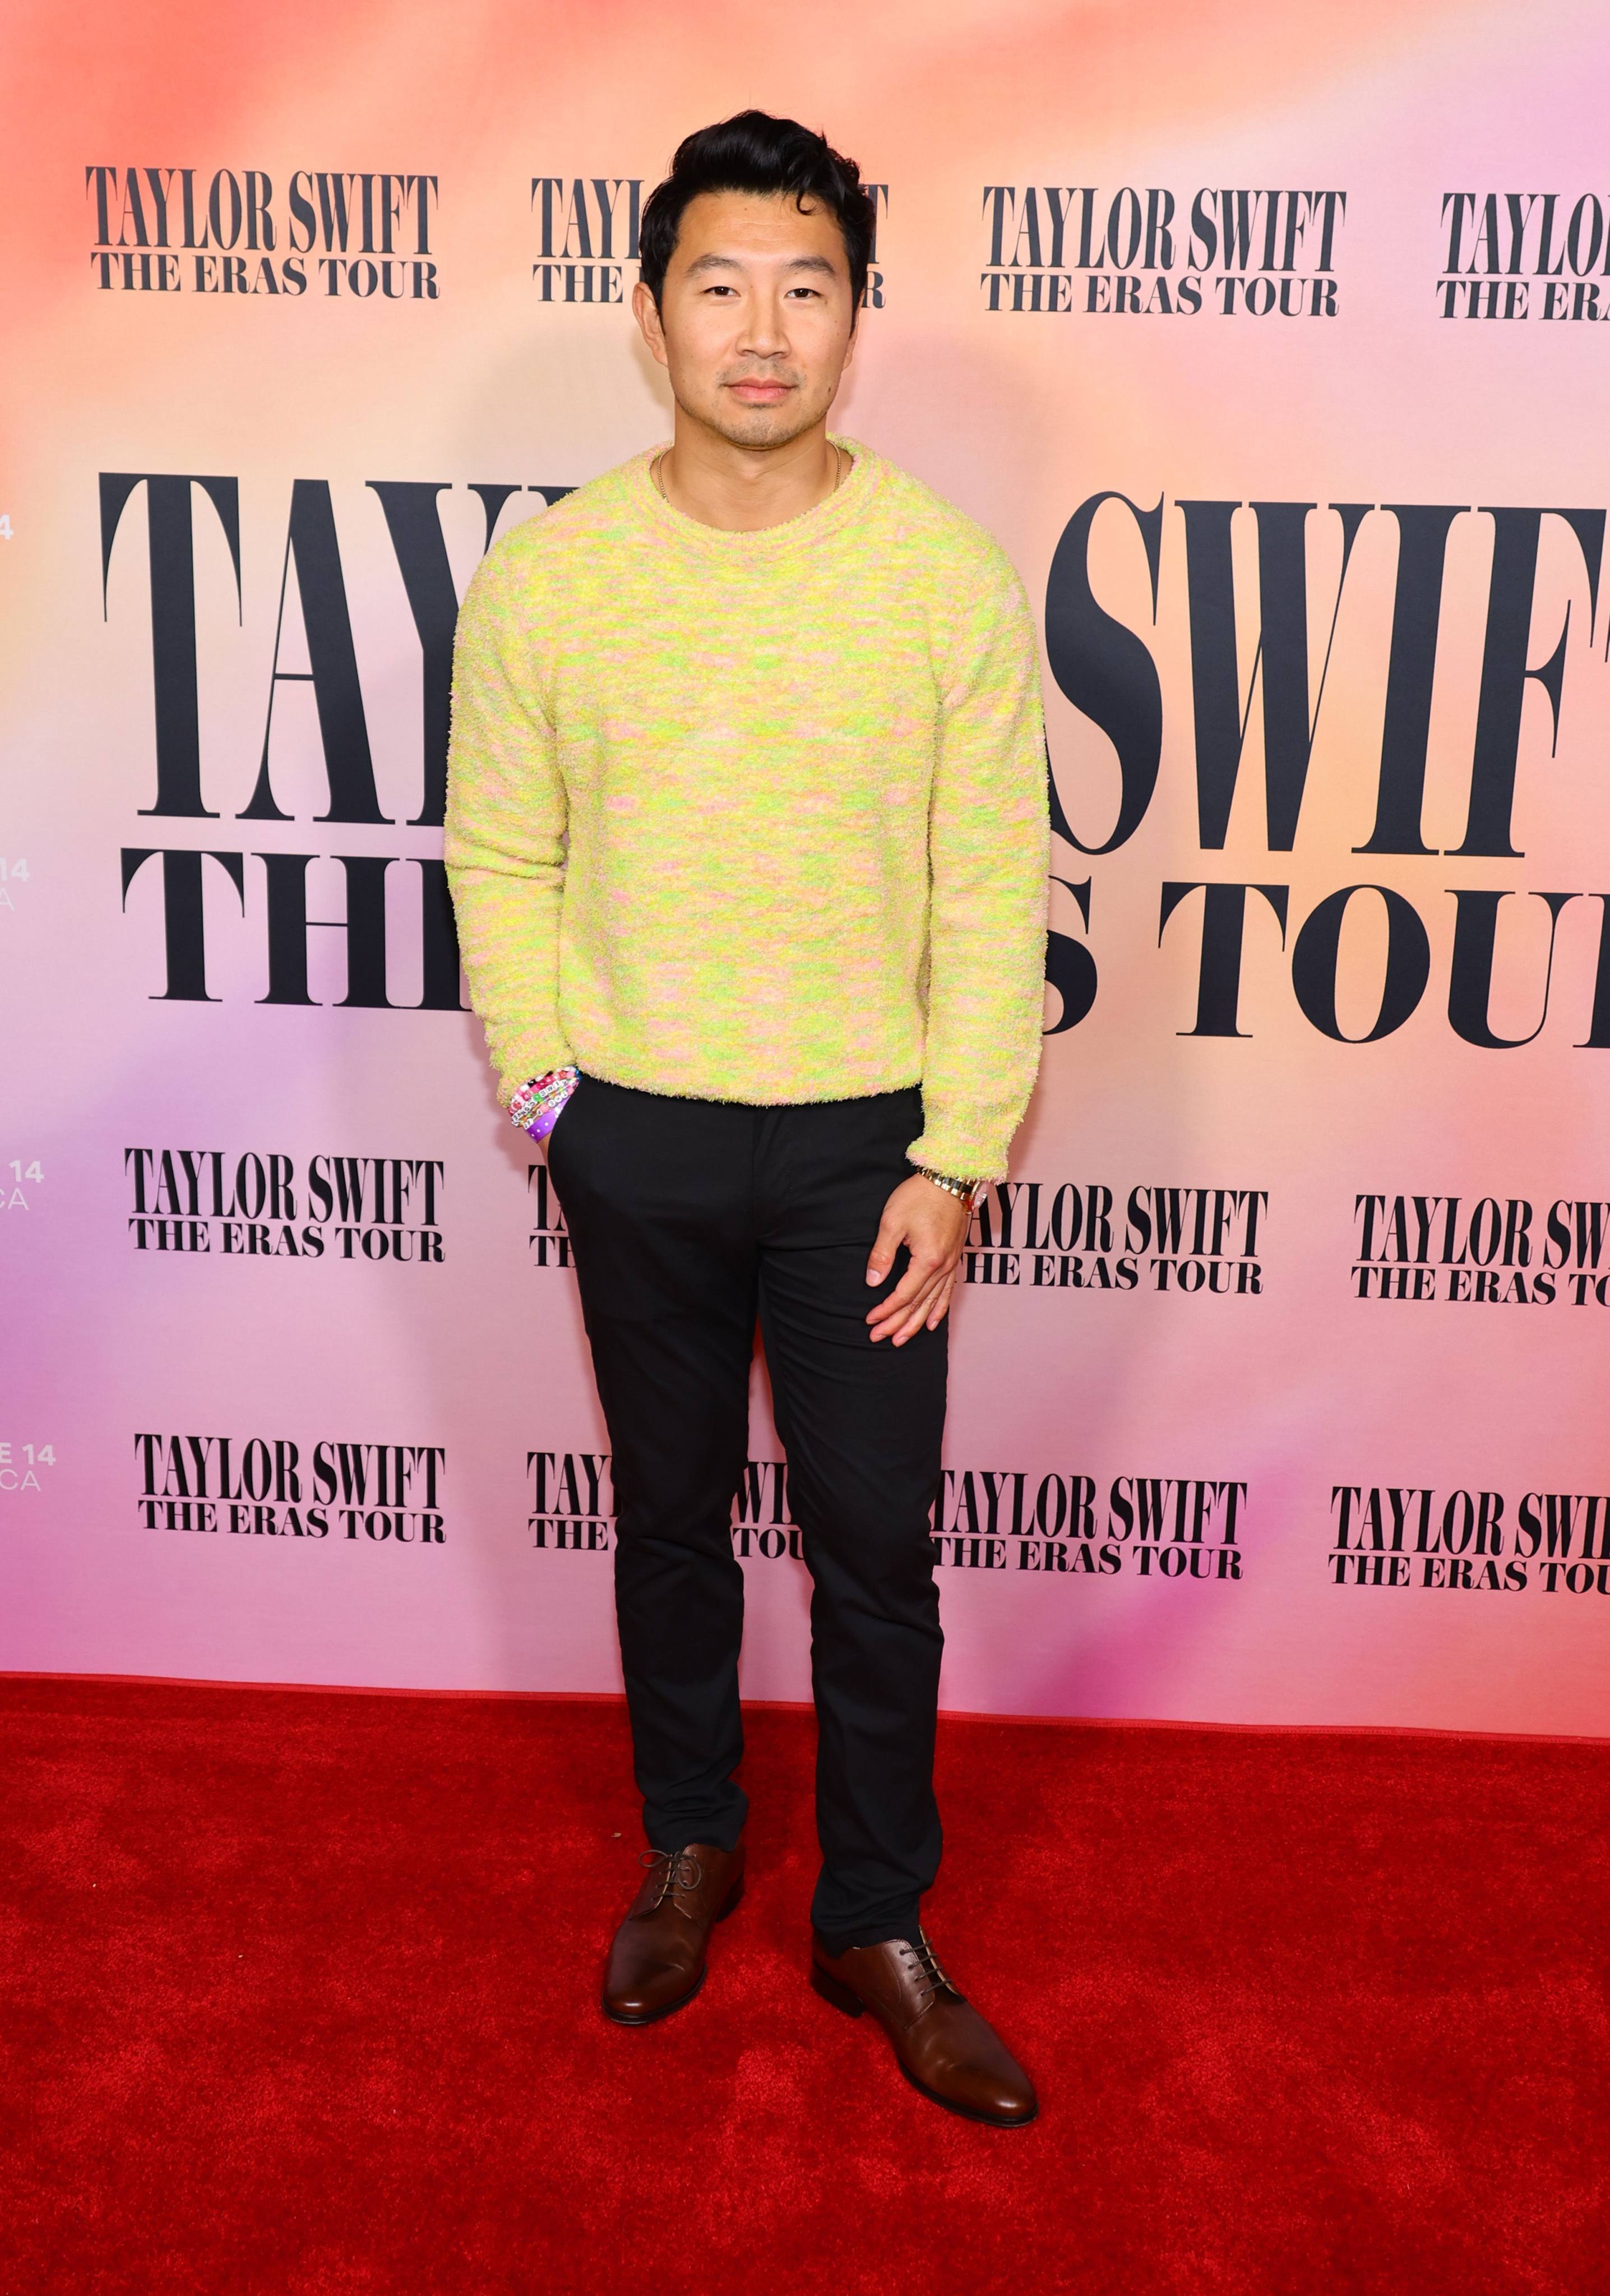 Simu Liu brought a splash of yellow to the red carpet at the premiere of Taylor Swift: The Eras Tour film in October. Photo: Getty Images